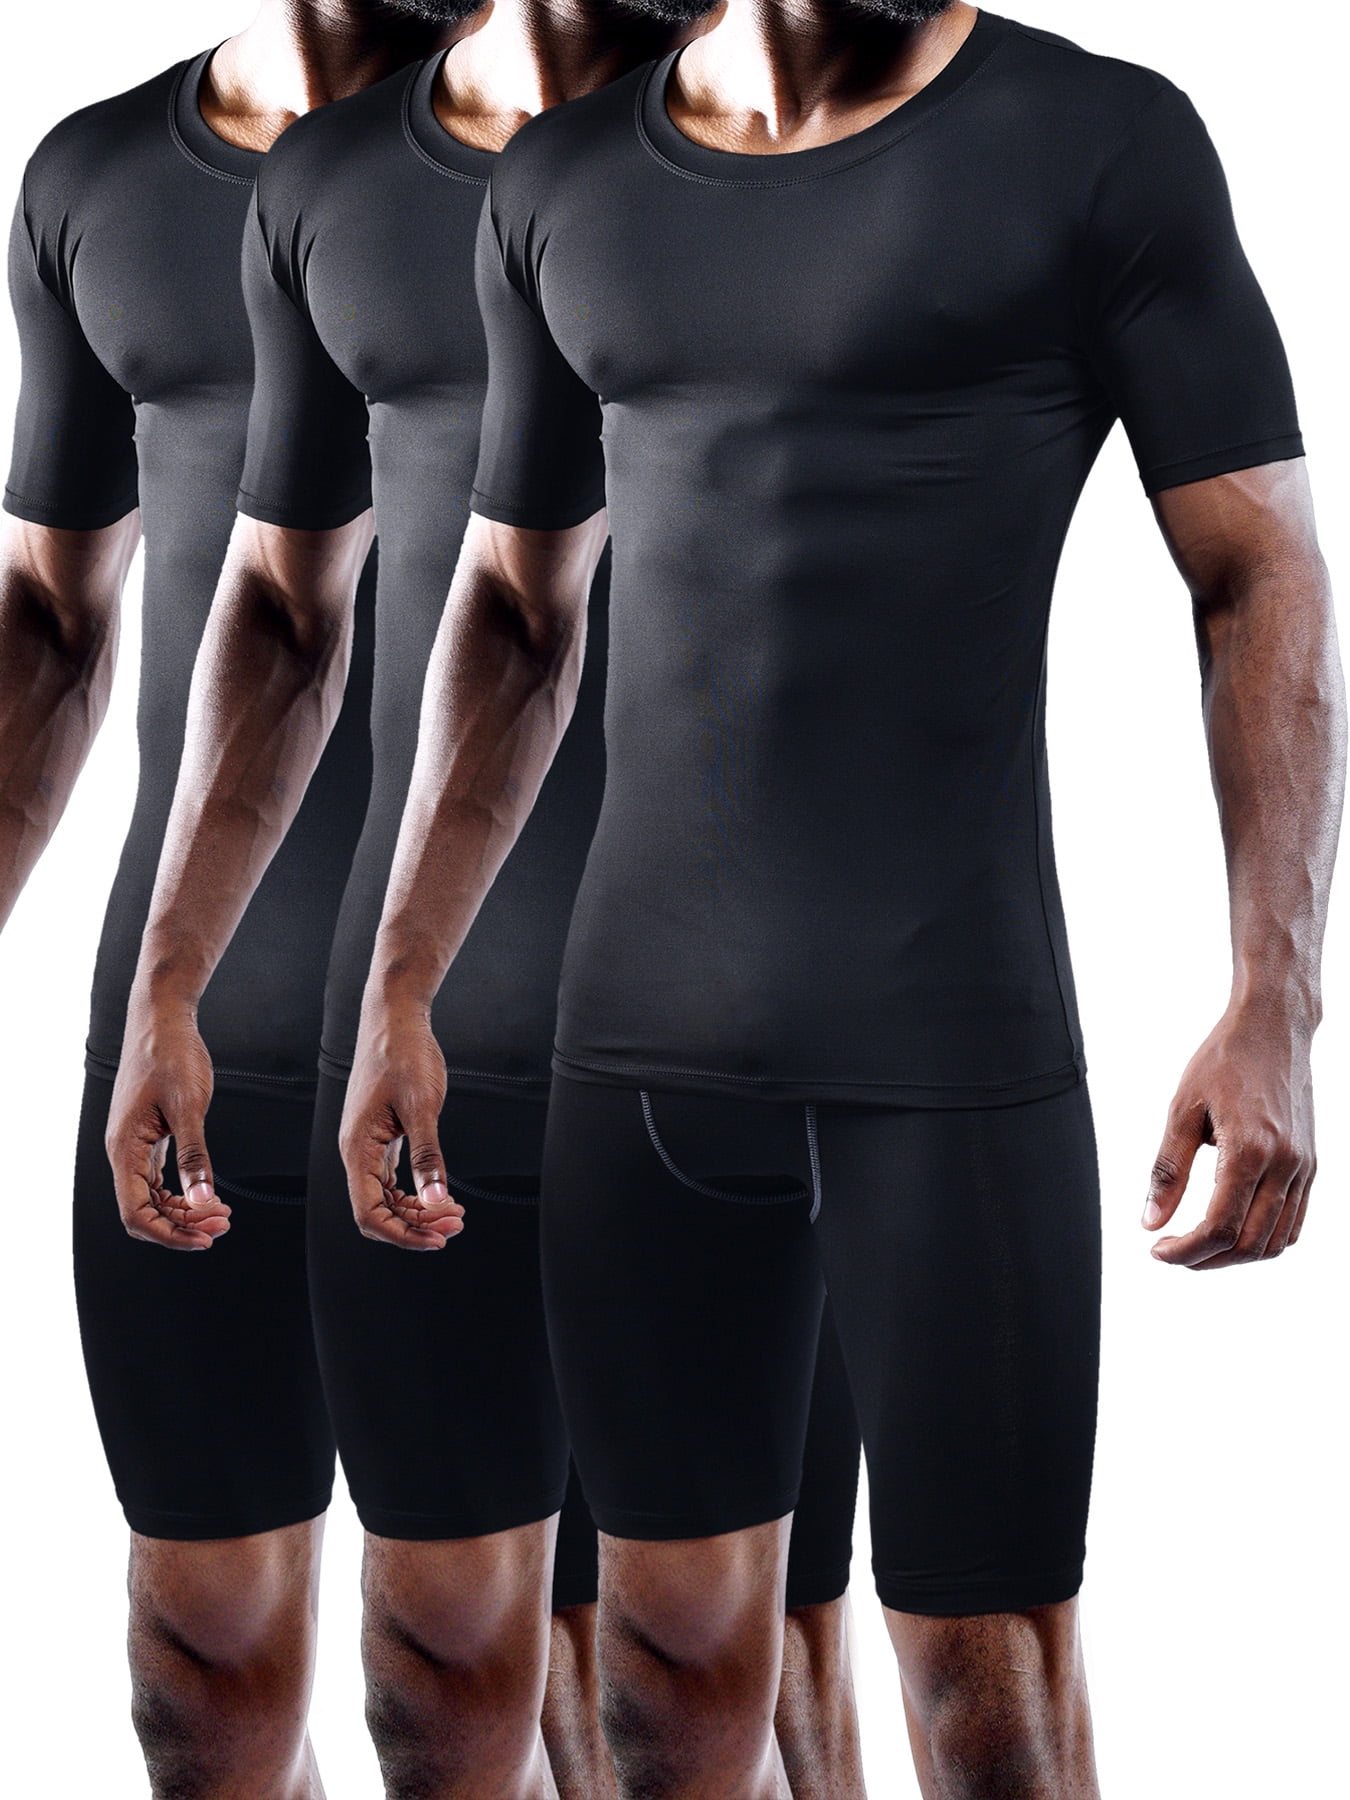 NELEUS Men's Athletic Compression Shirt Base Layer Tight Tops Short Sleeves  3 Pack,Black,US Size S